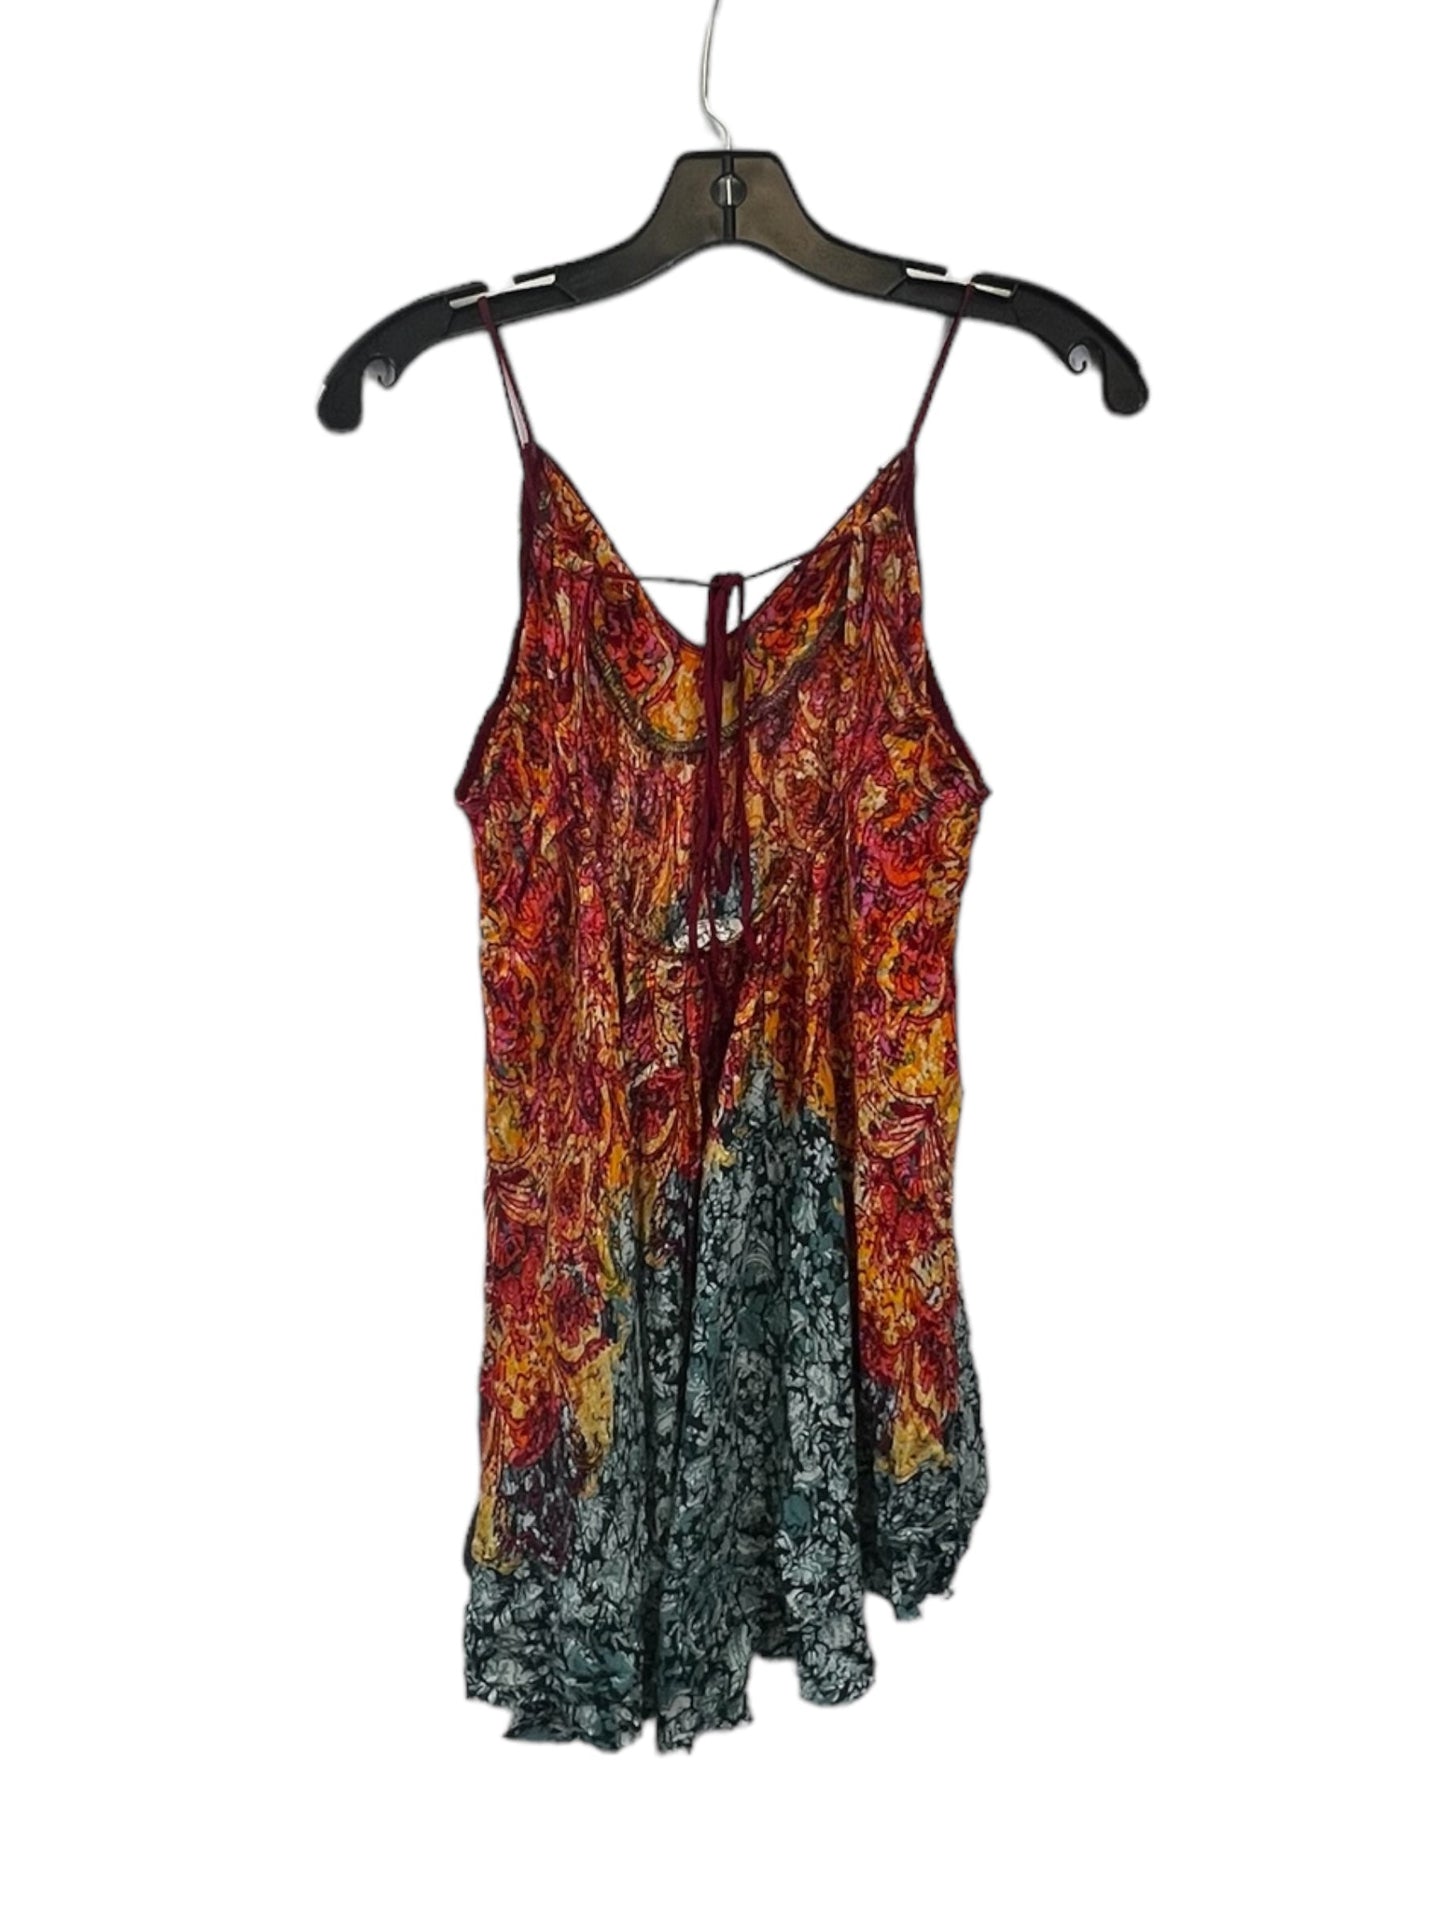 Multi-colored Top Sleeveless Free People, Size Xs